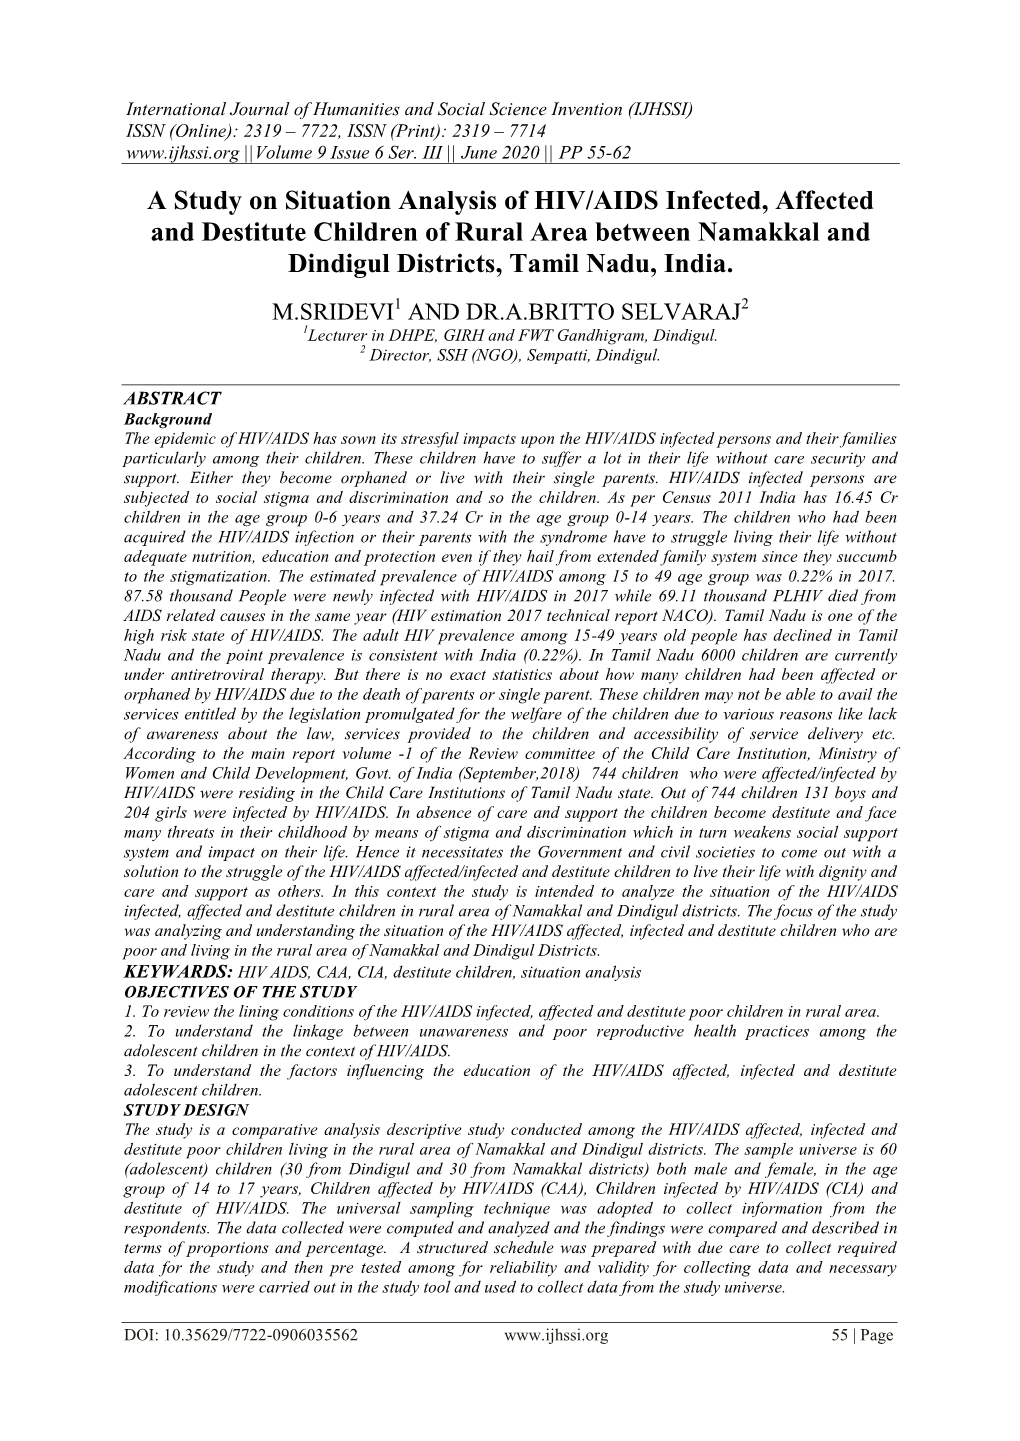 A Study on Situation Analysis of HIV/AIDS Infected, Affected and Destitute Children of Rural Area Between Namakkal and Dindigul Districts, Tamil Nadu, India